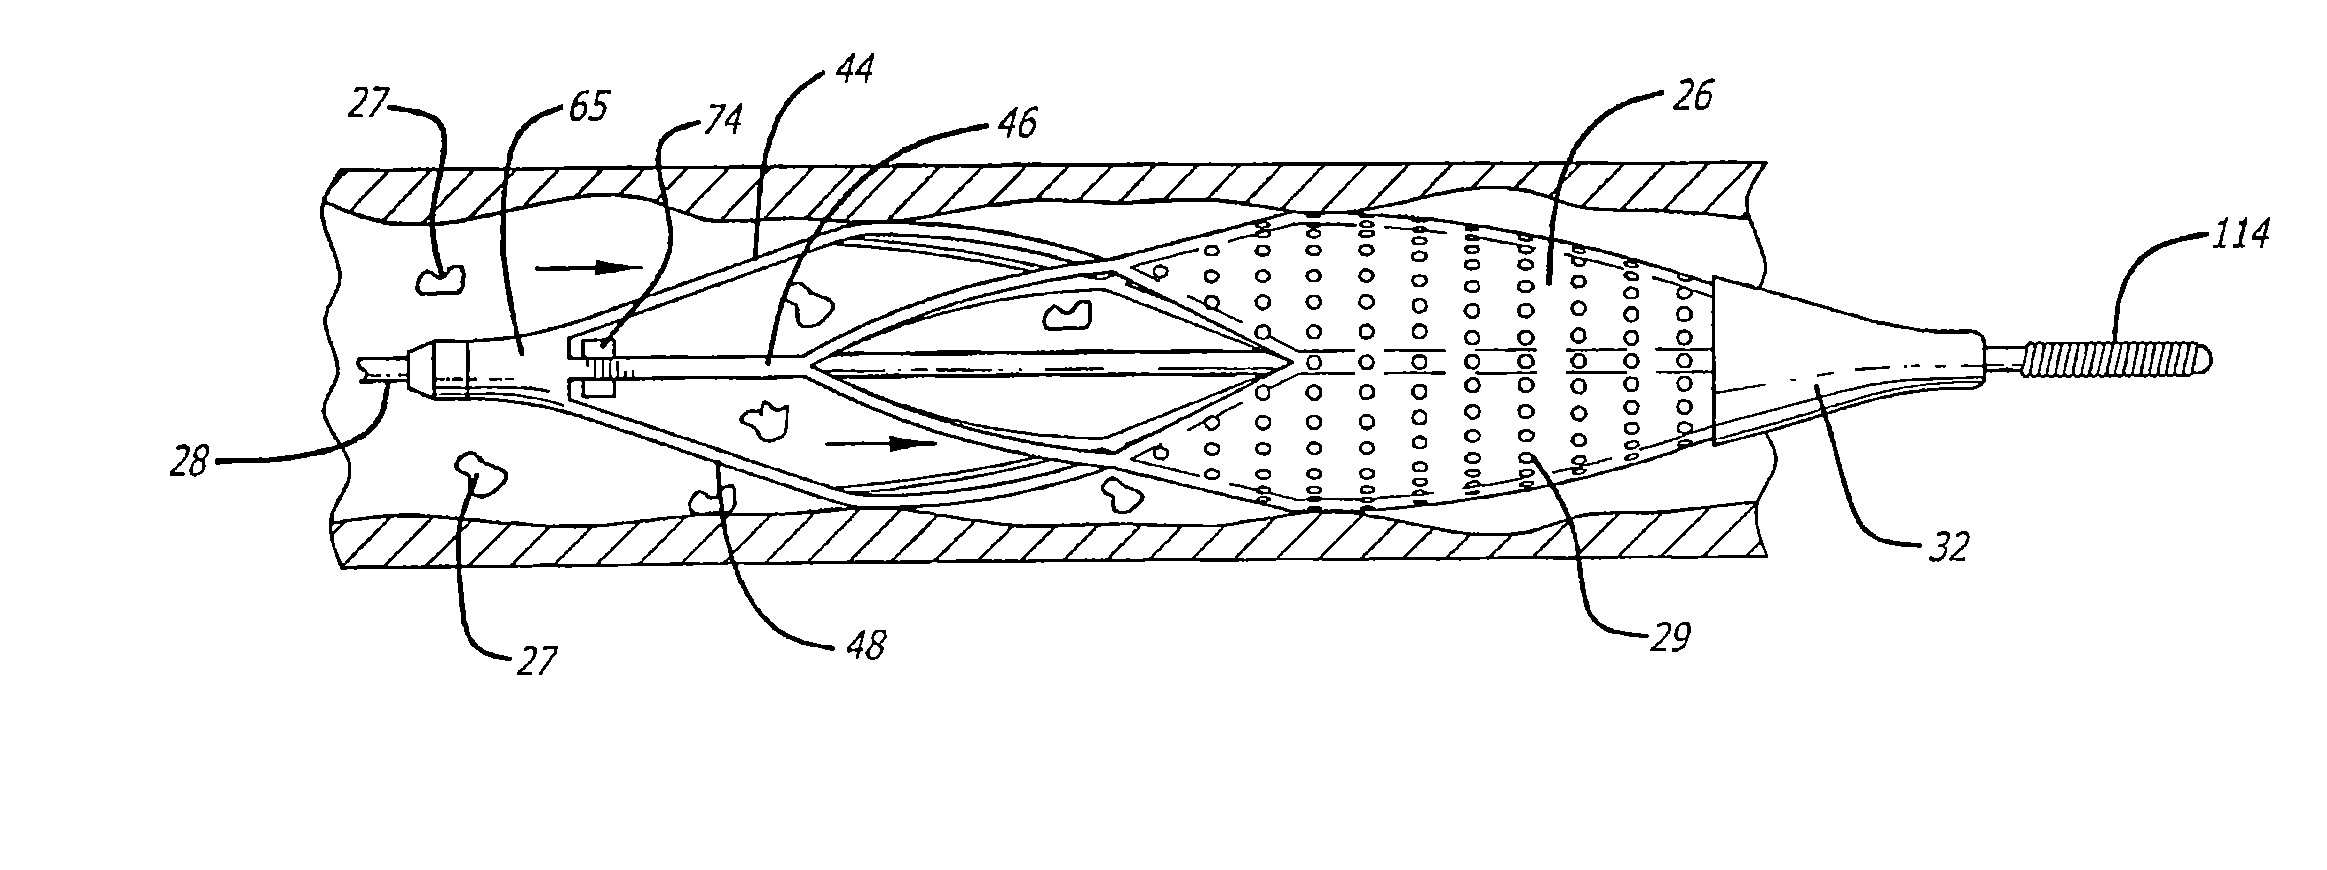 Cage and sleeve assembly for a filtering device